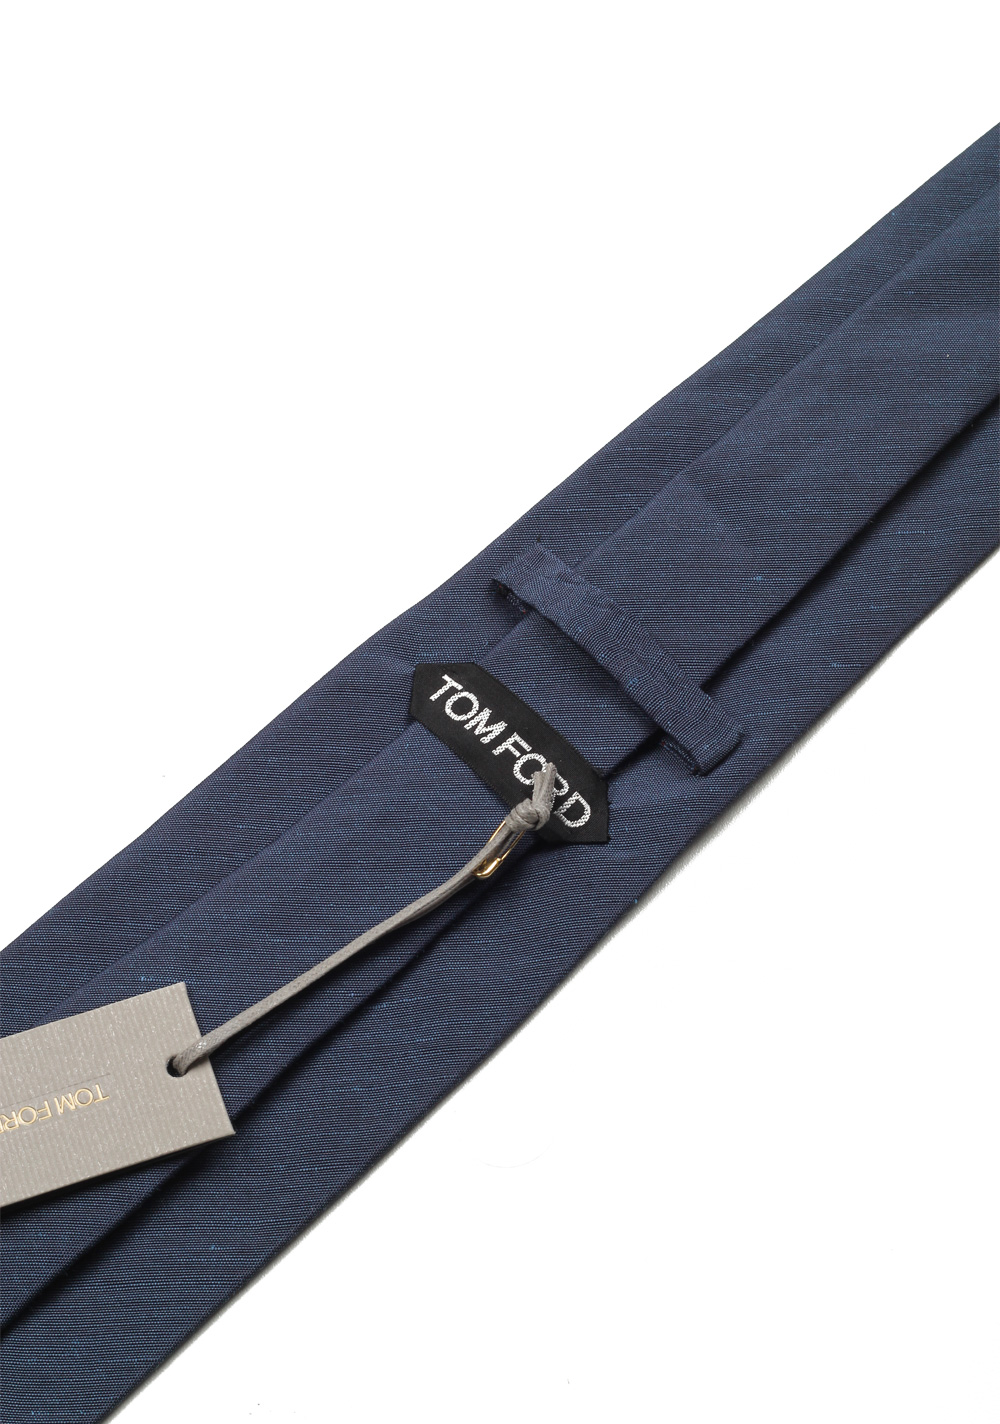 TOM FORD Solid Blue Tie In Silk | Costume Limité